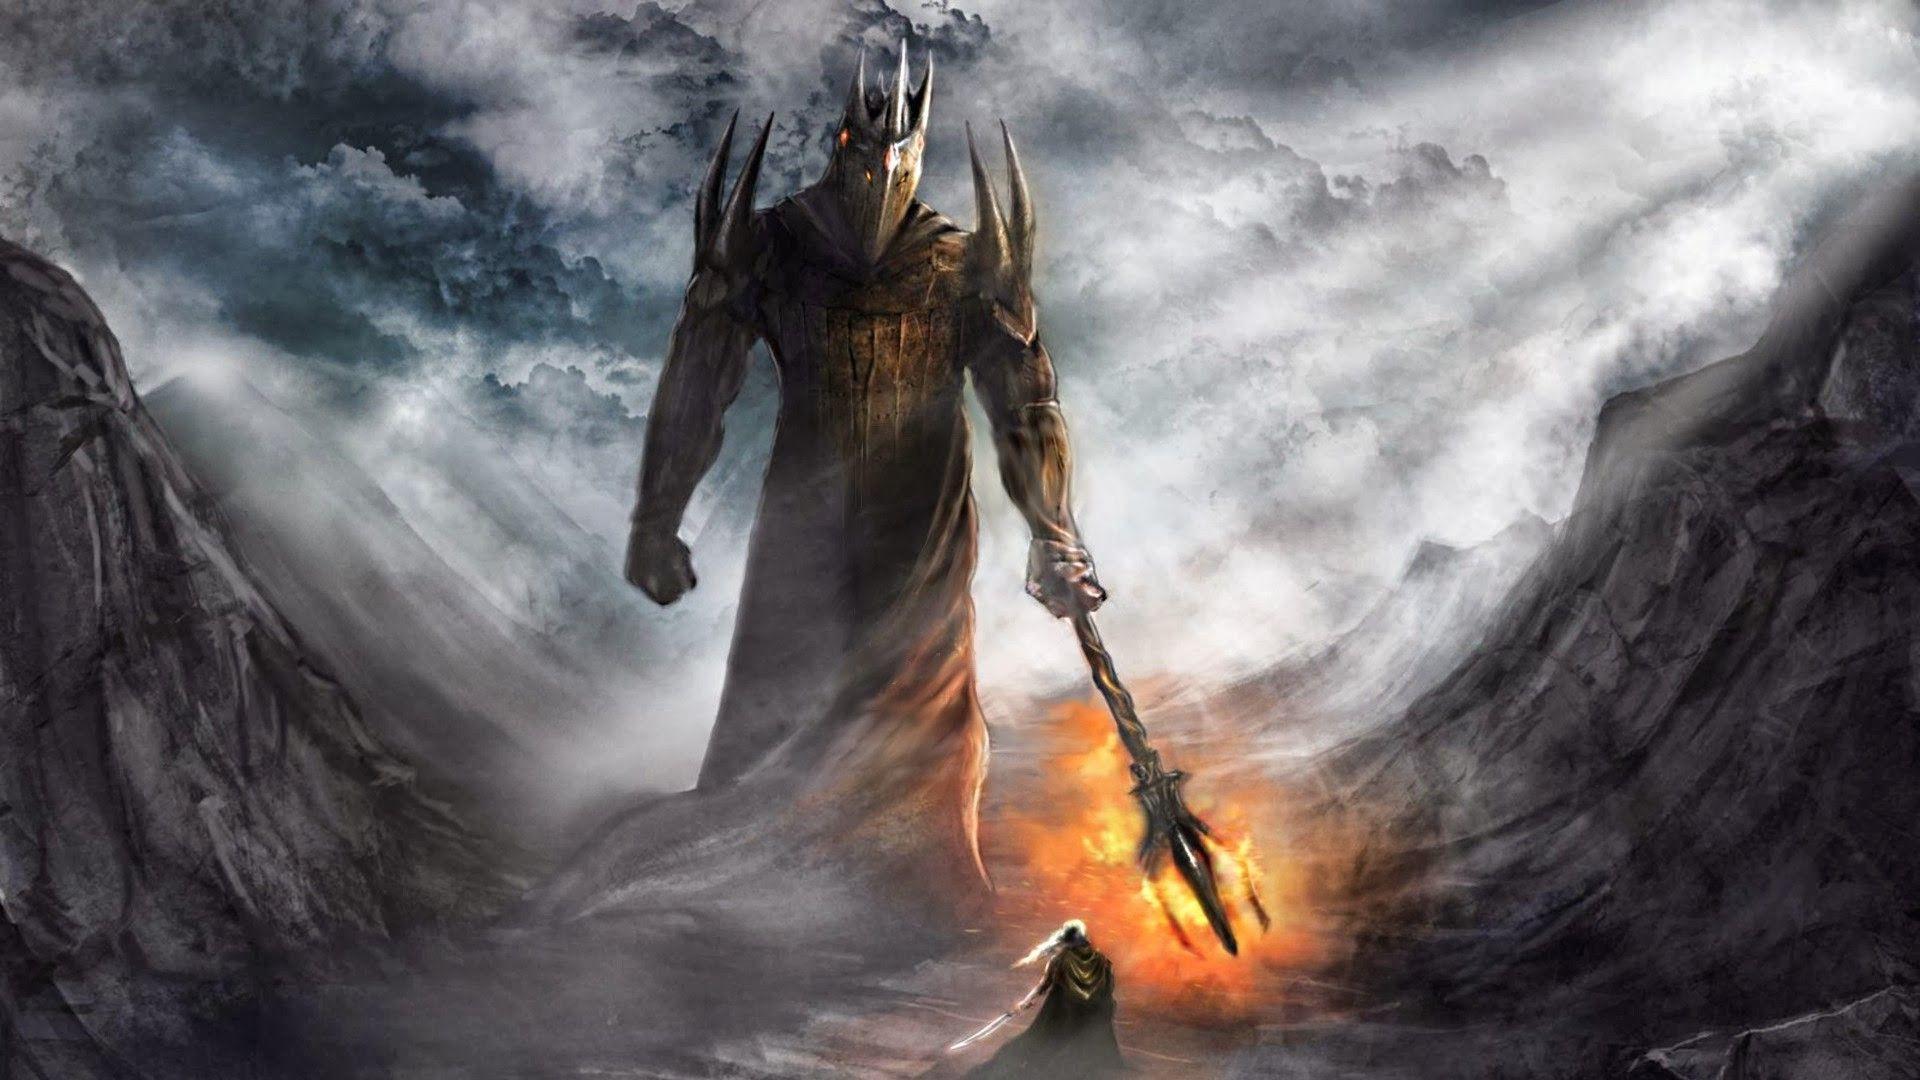 fantasy Art, The Lord Of The Rings, Morgoth, J. R. R. Tolkien